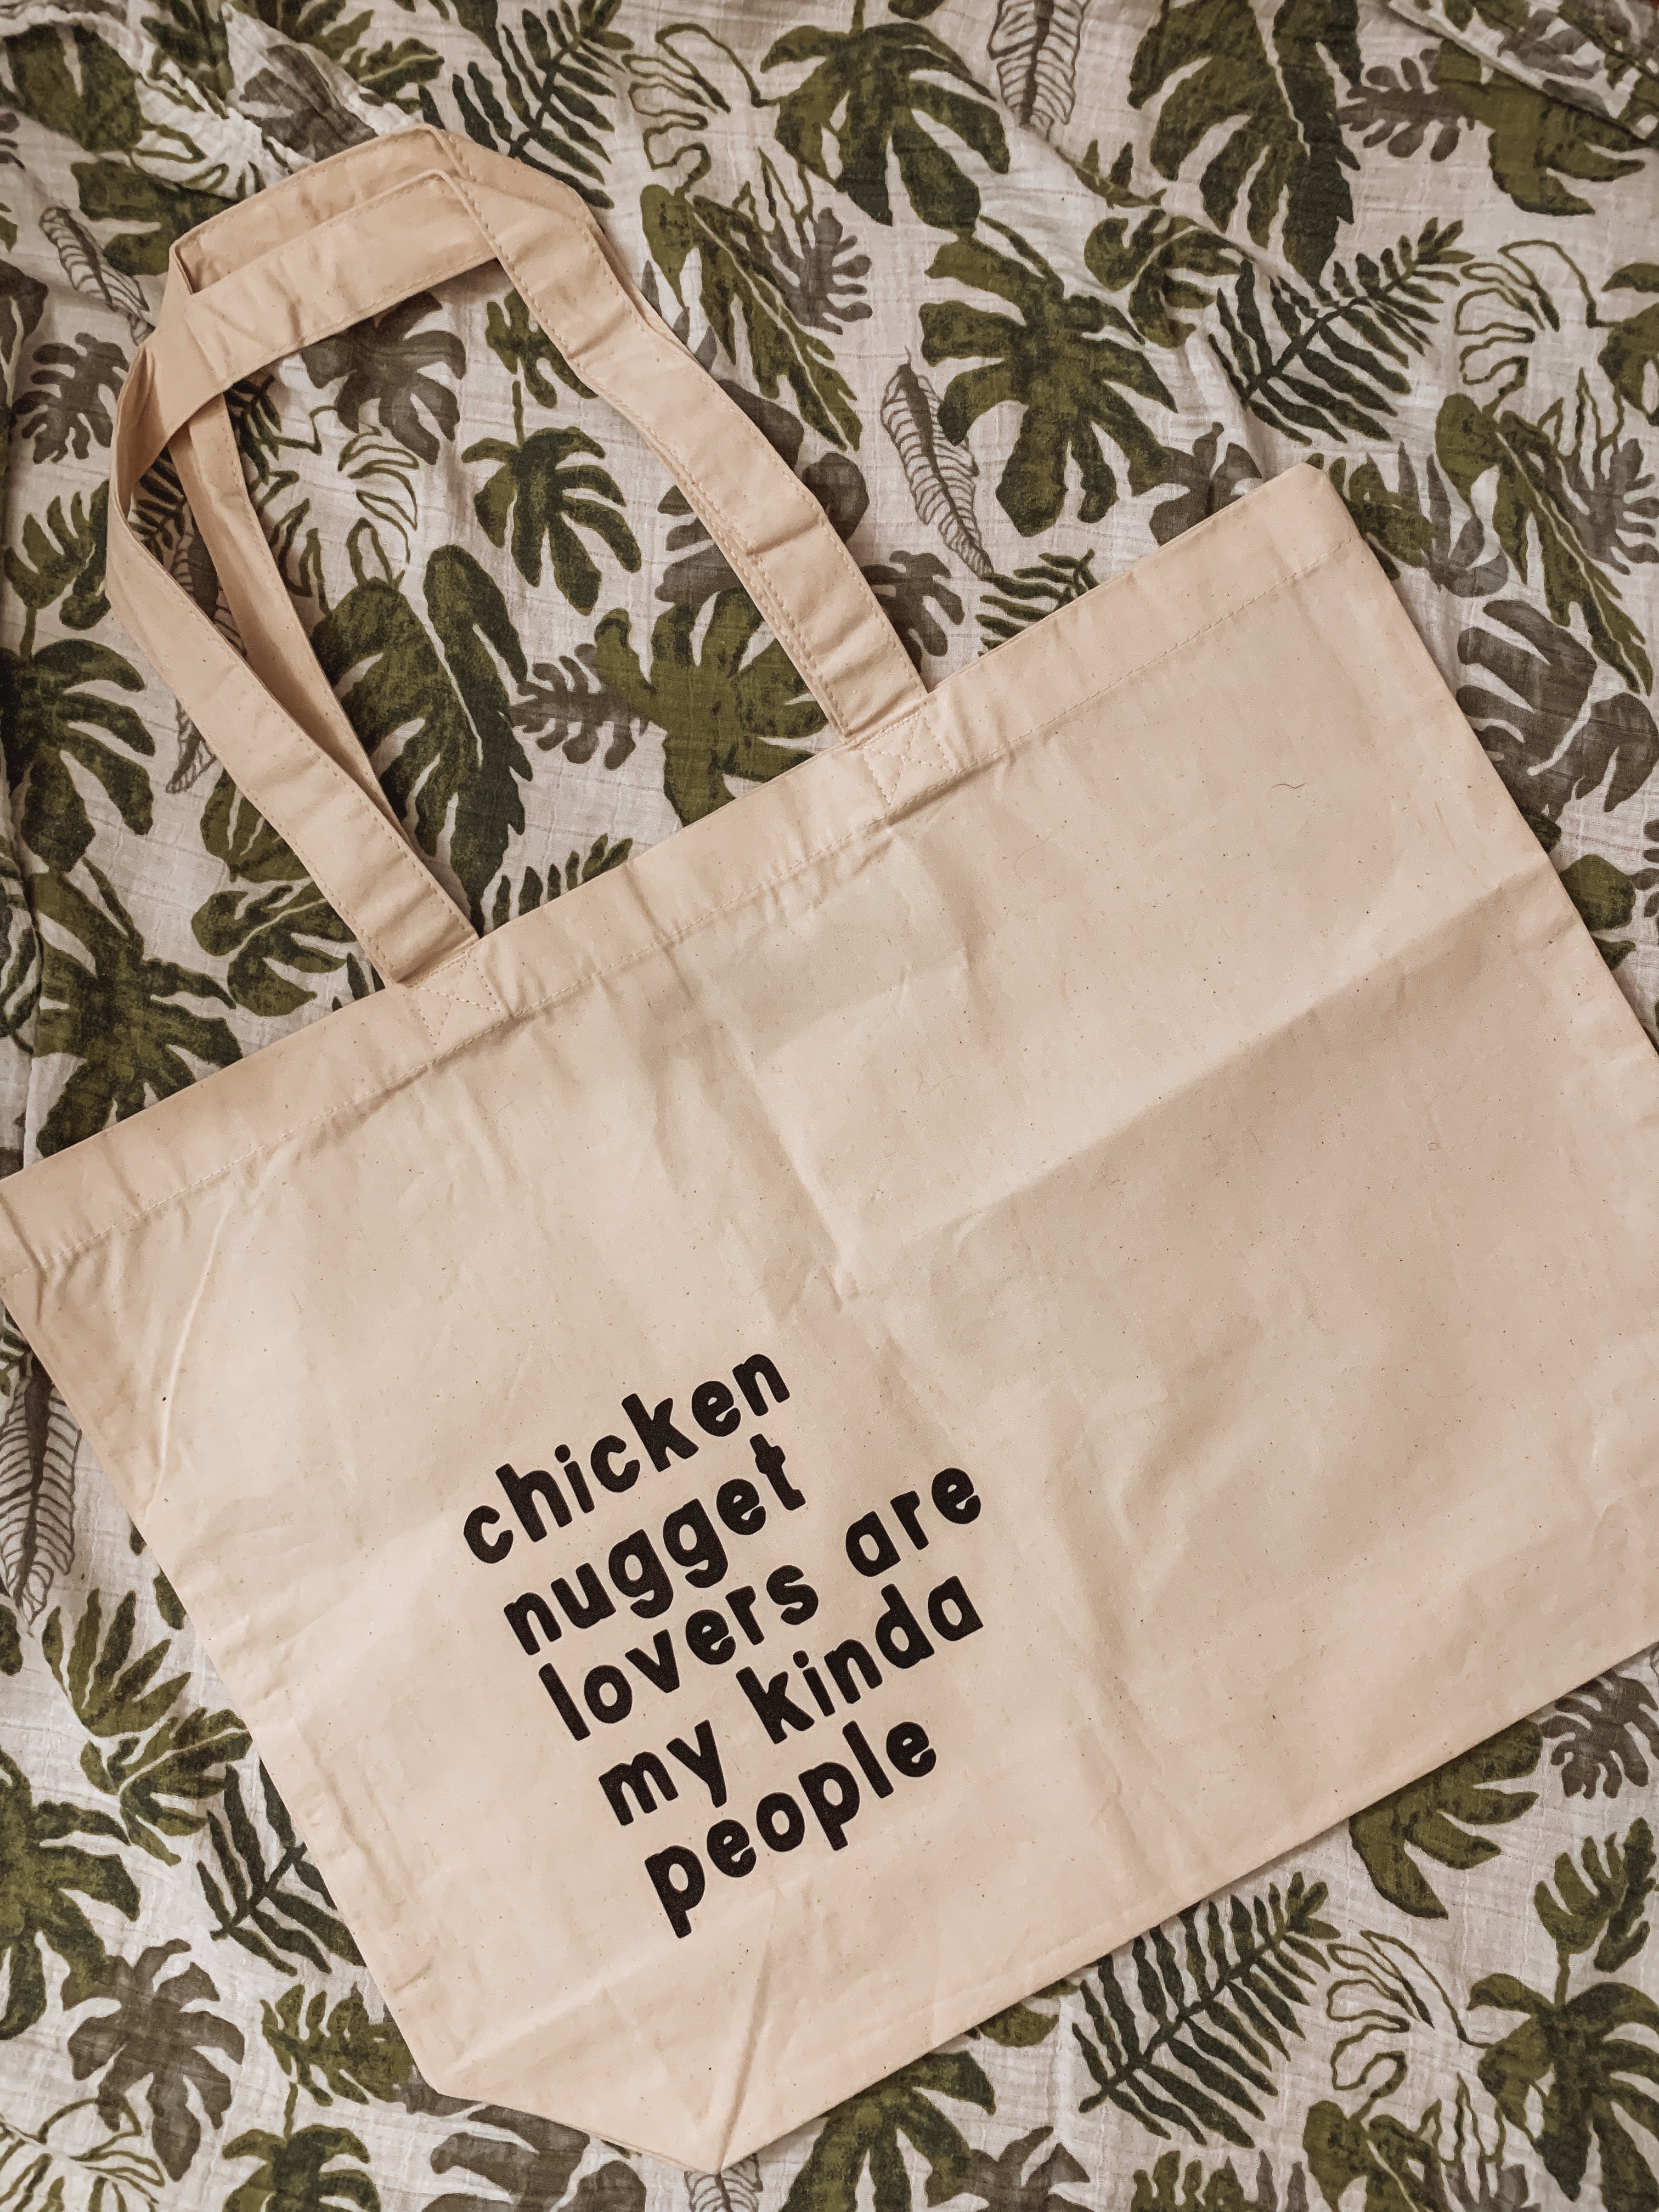 Chicken nugget lover cotton tote bag, large with black writing